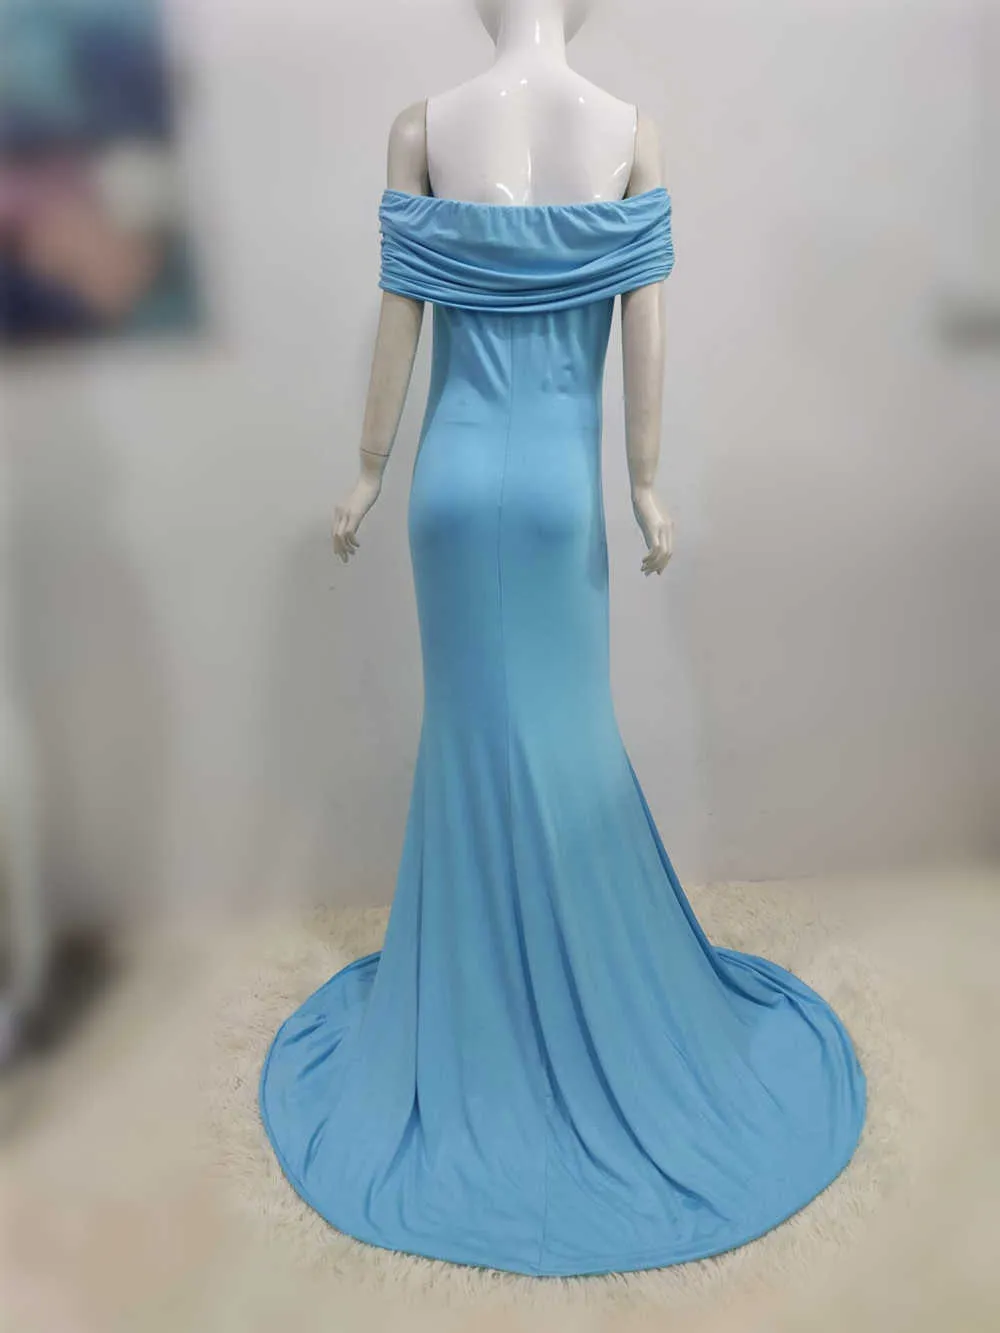 Shoulderless Maternity Dresses Photography Props Long Pregnancy Dress For Baby Shower Photo Shoots Pregnant Women Maxi Gown 2020 (9)